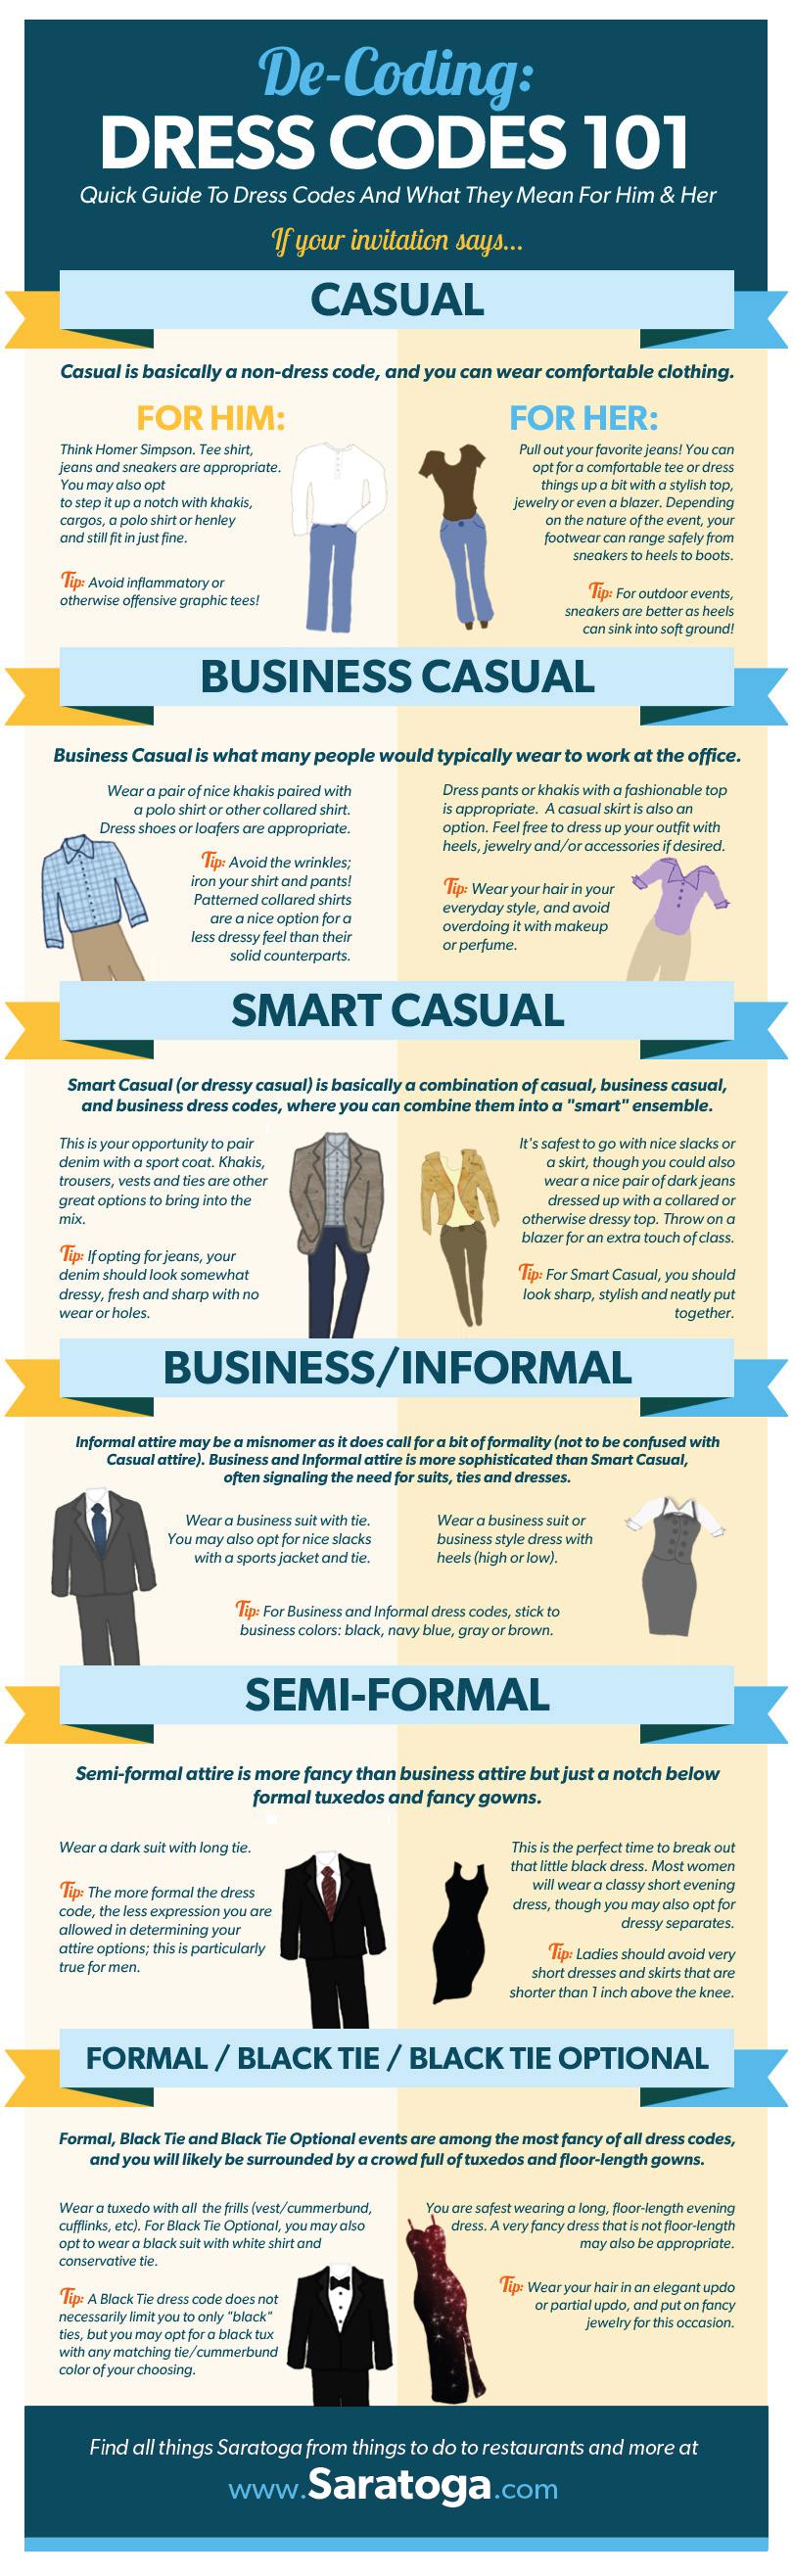 The Complete Attire Guide – All Dress Codes Explained